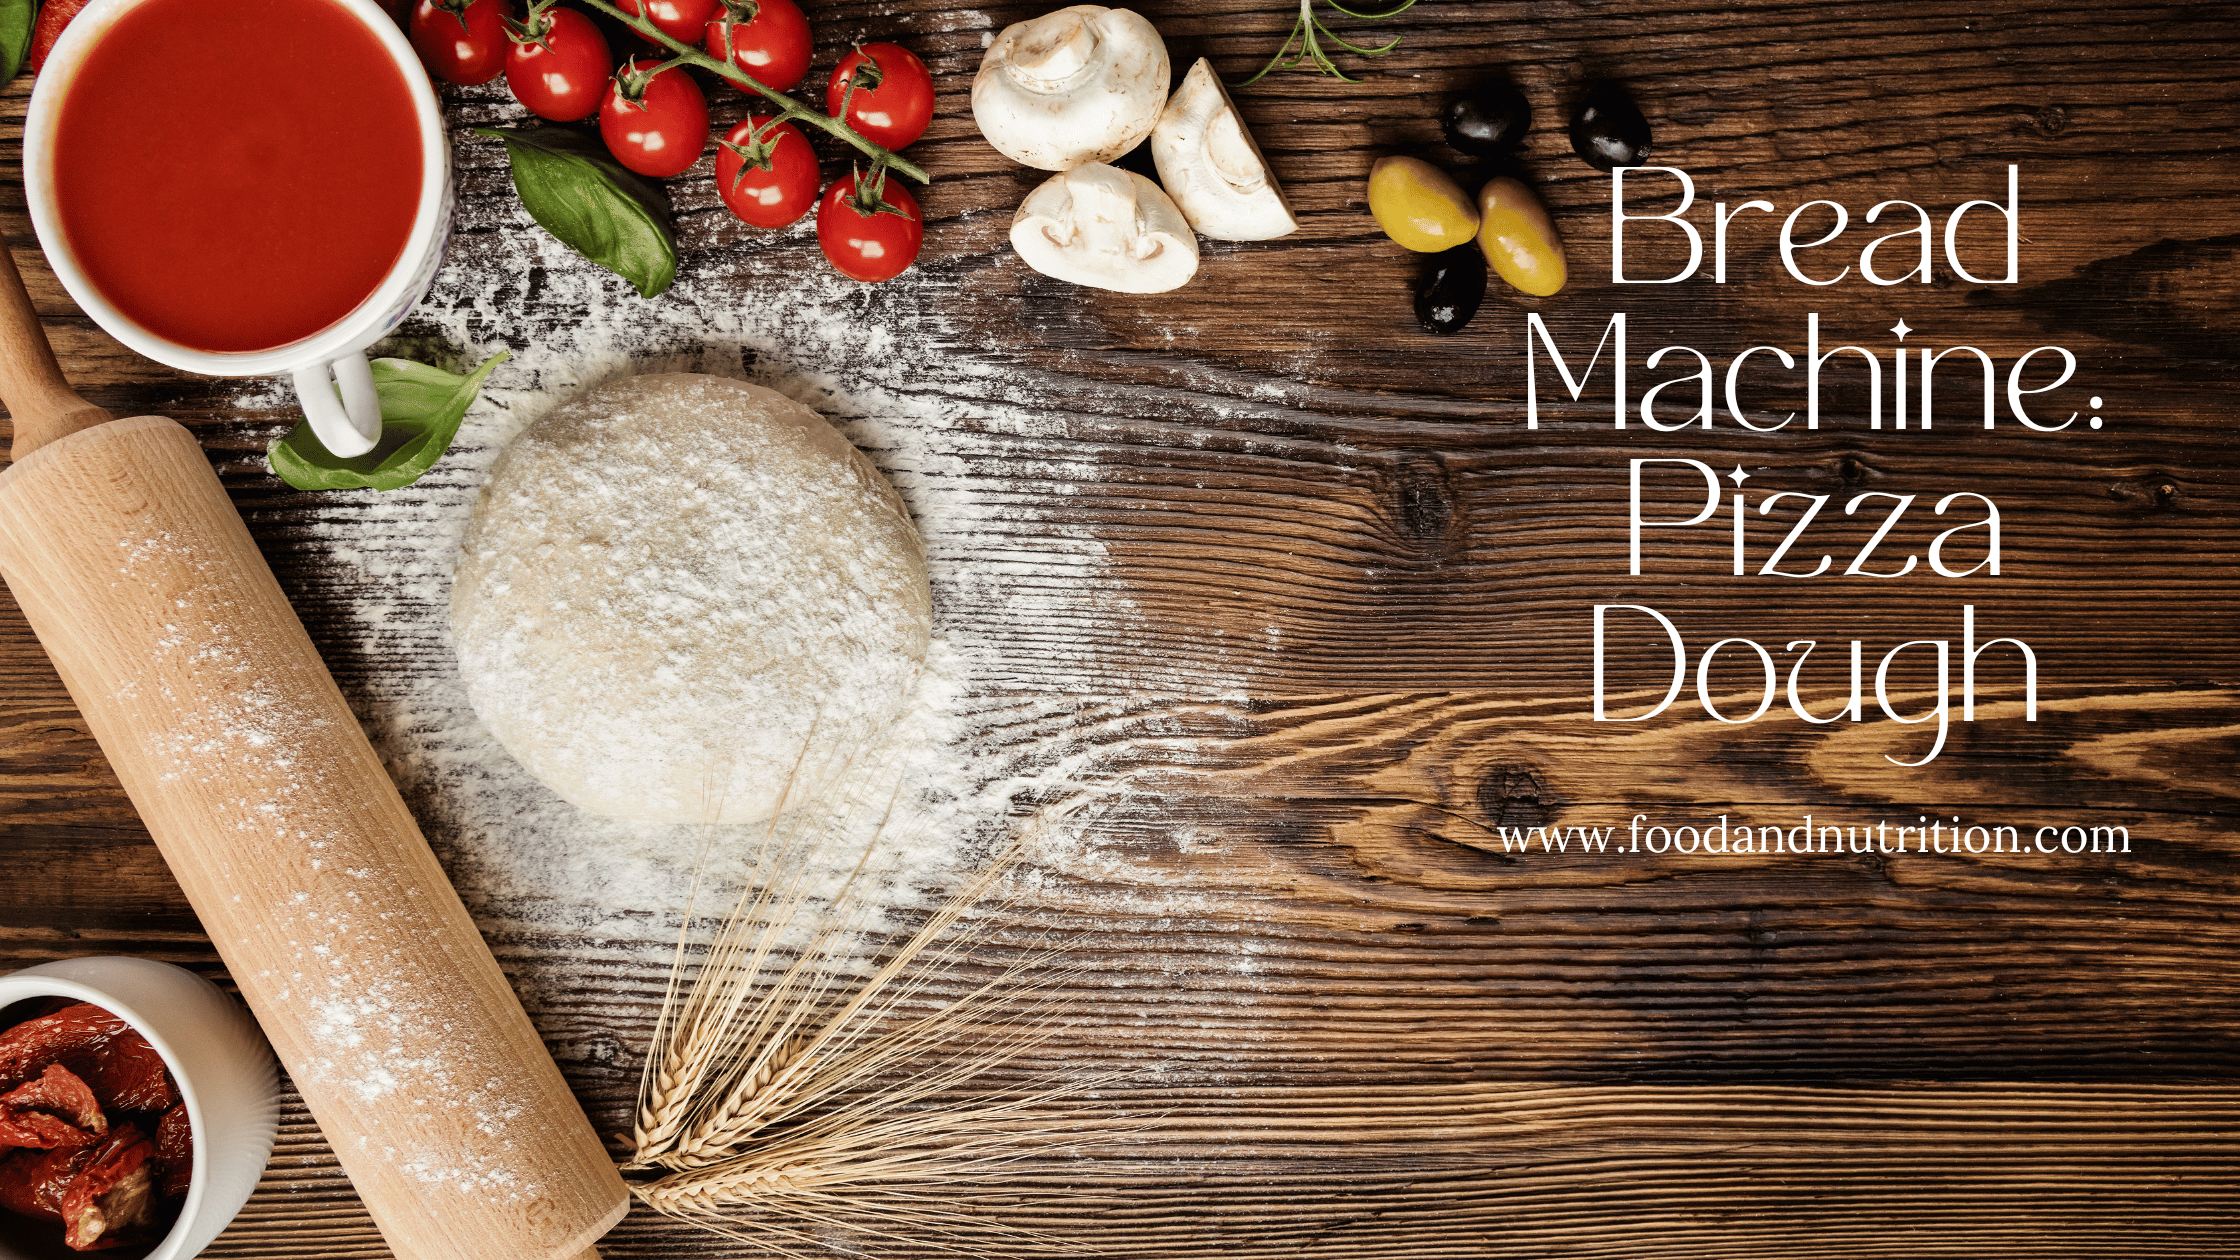 Bread Machine Pizza Dough: Your Secret Weapon for Quick and Delicious Homemade Pizza